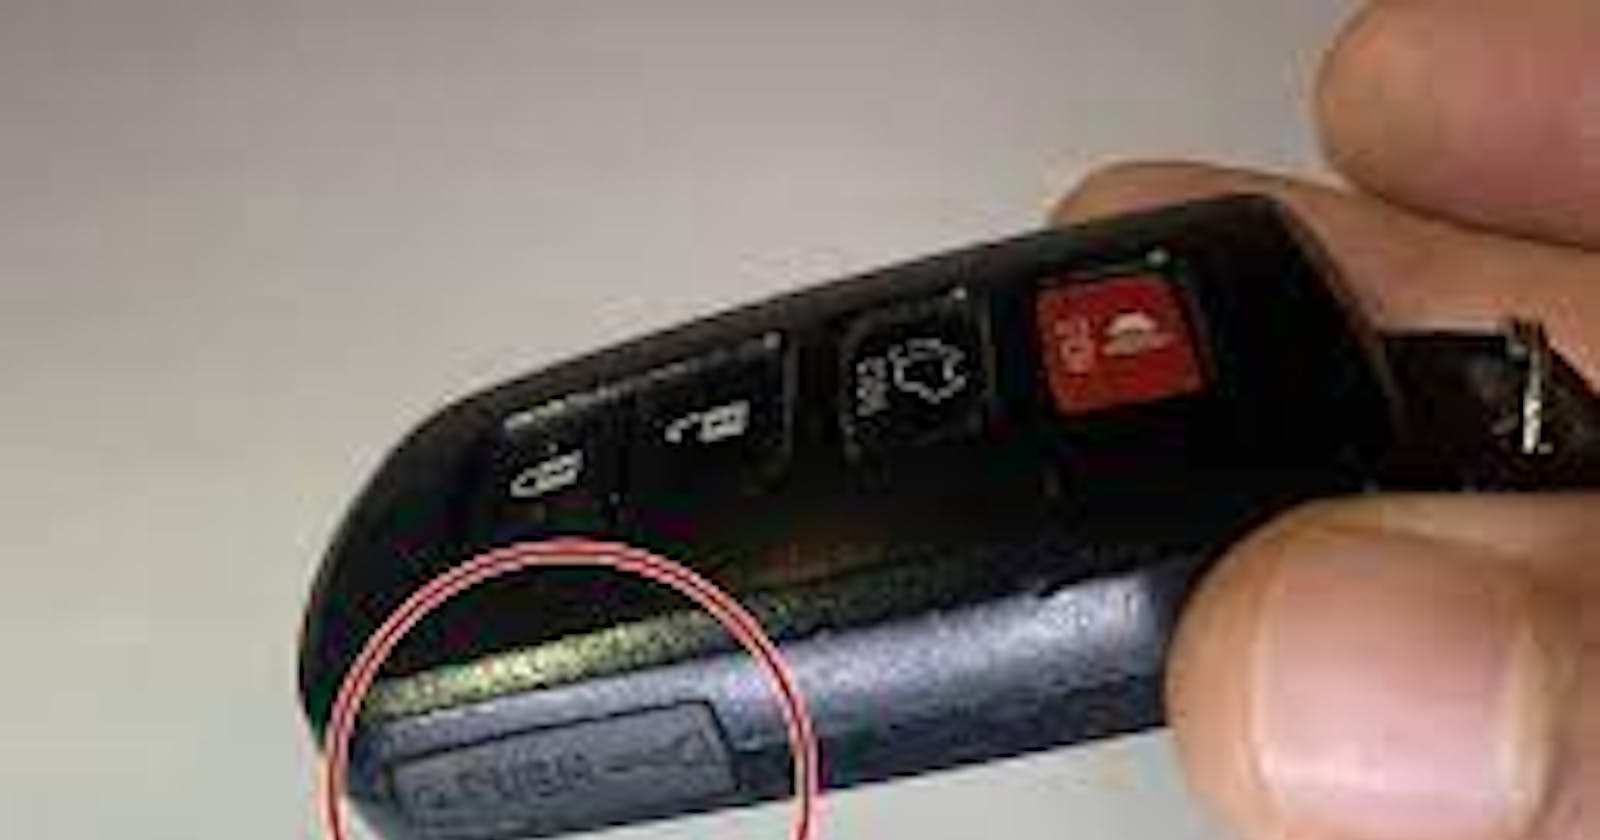 How to change battery in toyota key fob?